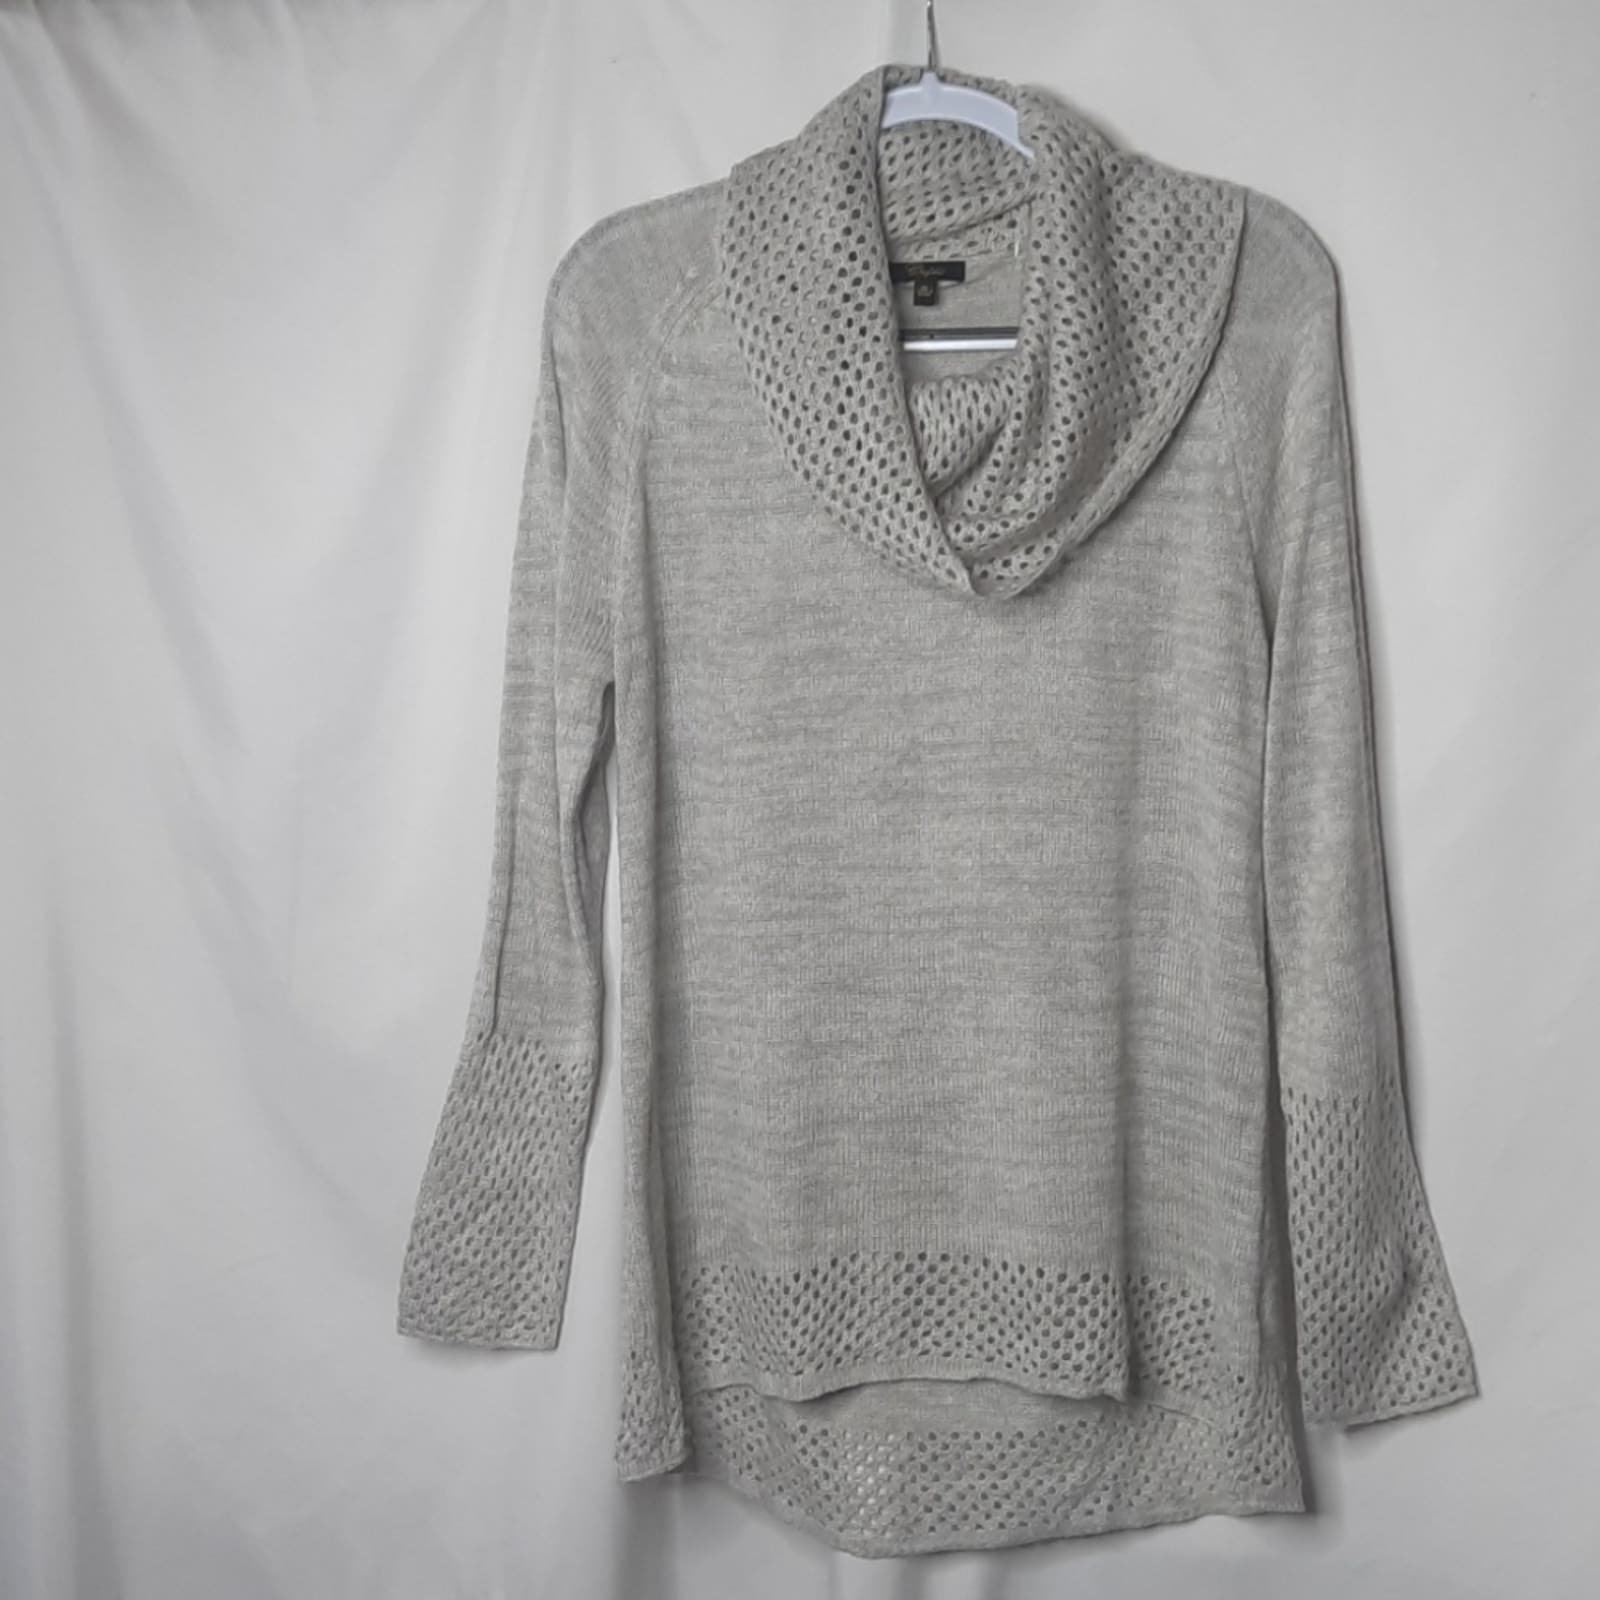 save up to 70% Cupio Womens Sweater Open Knit Cowl Neck Marled Gray XL JqXEsYh4G Online Shop